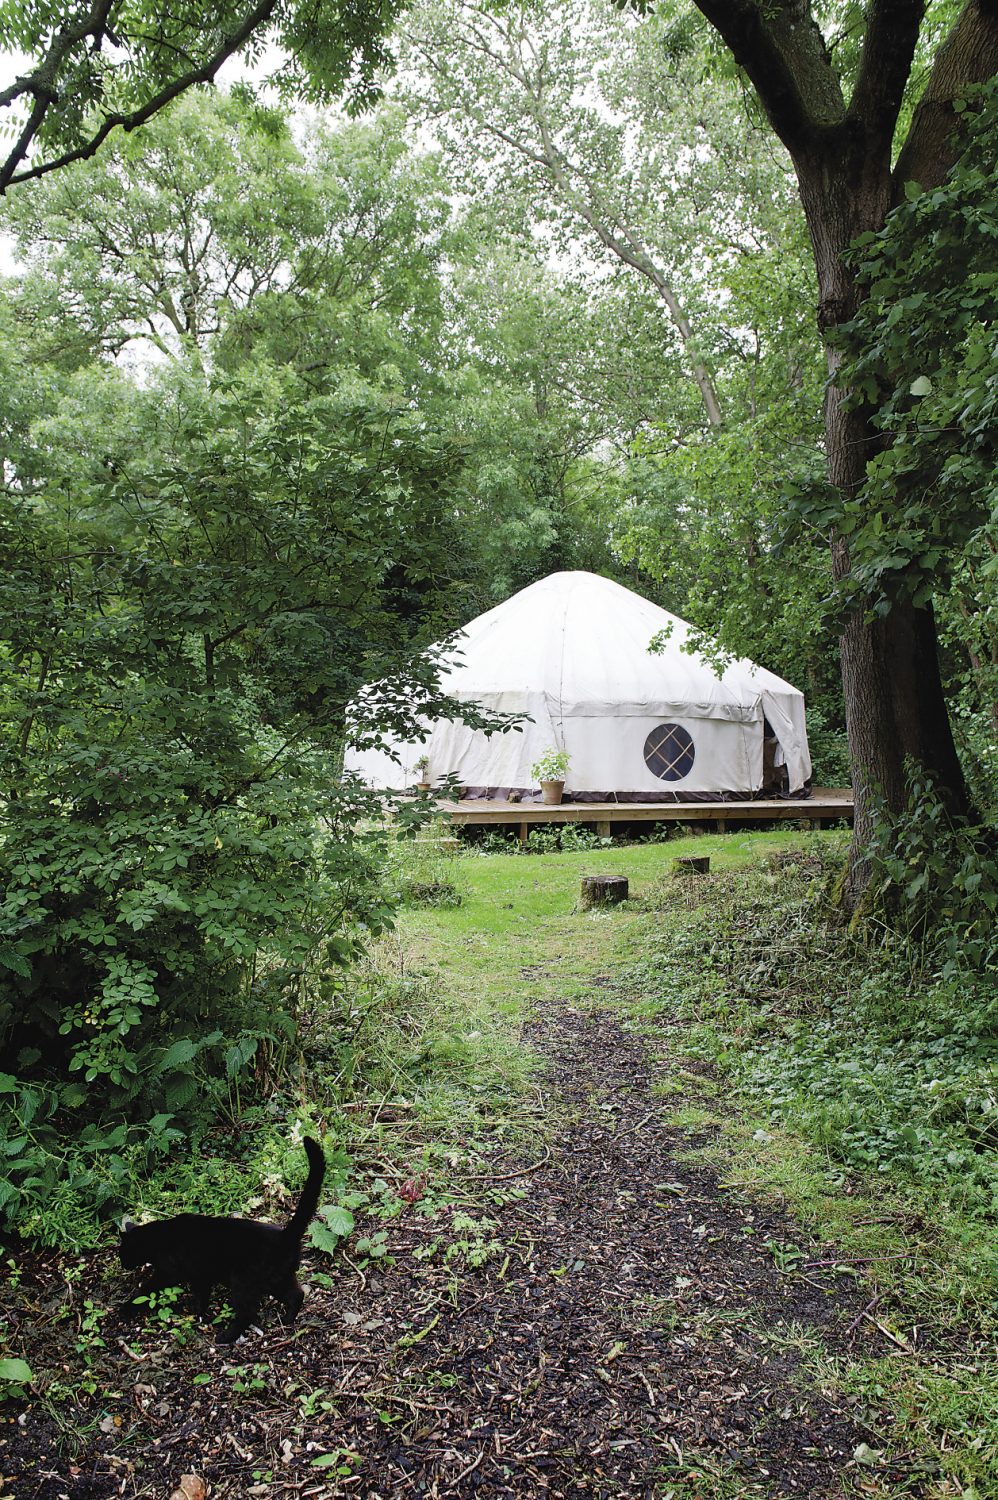 A path gently winds its way through the woods to a magnificent yurt. Inside the vast dome, the supports have been cut from hazel trees at Stanmer Park in Brighton. On its wooden floor there are yoga mats laid out in a neat circle ready for the next group